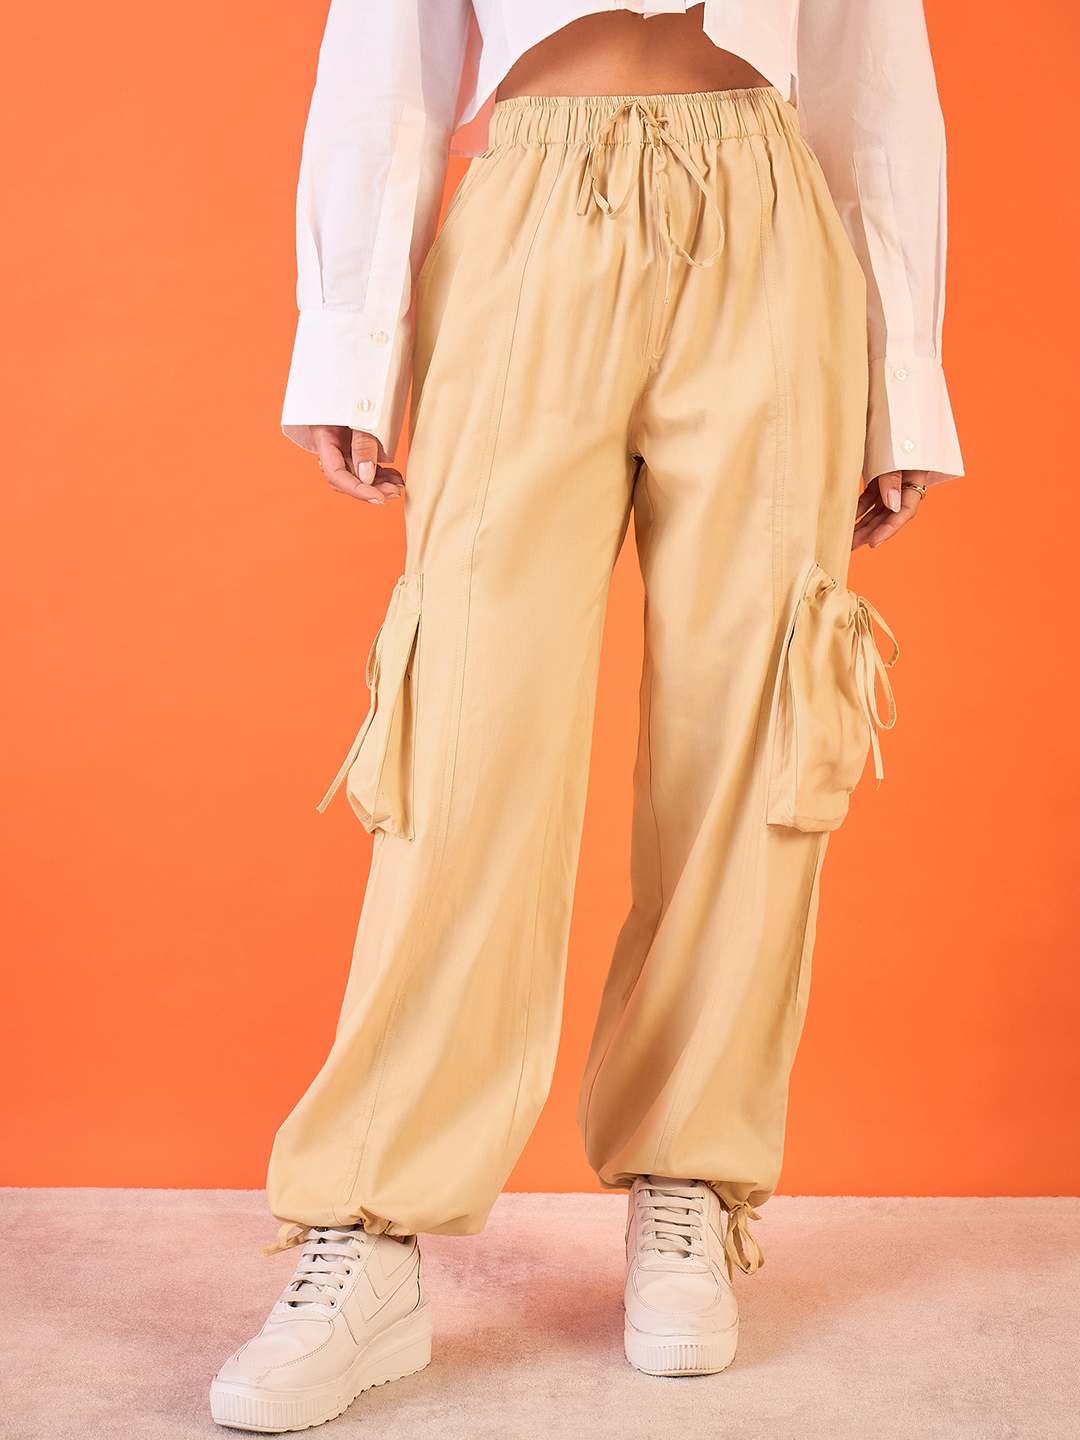 Relaxed Korean Front Pleated Pants